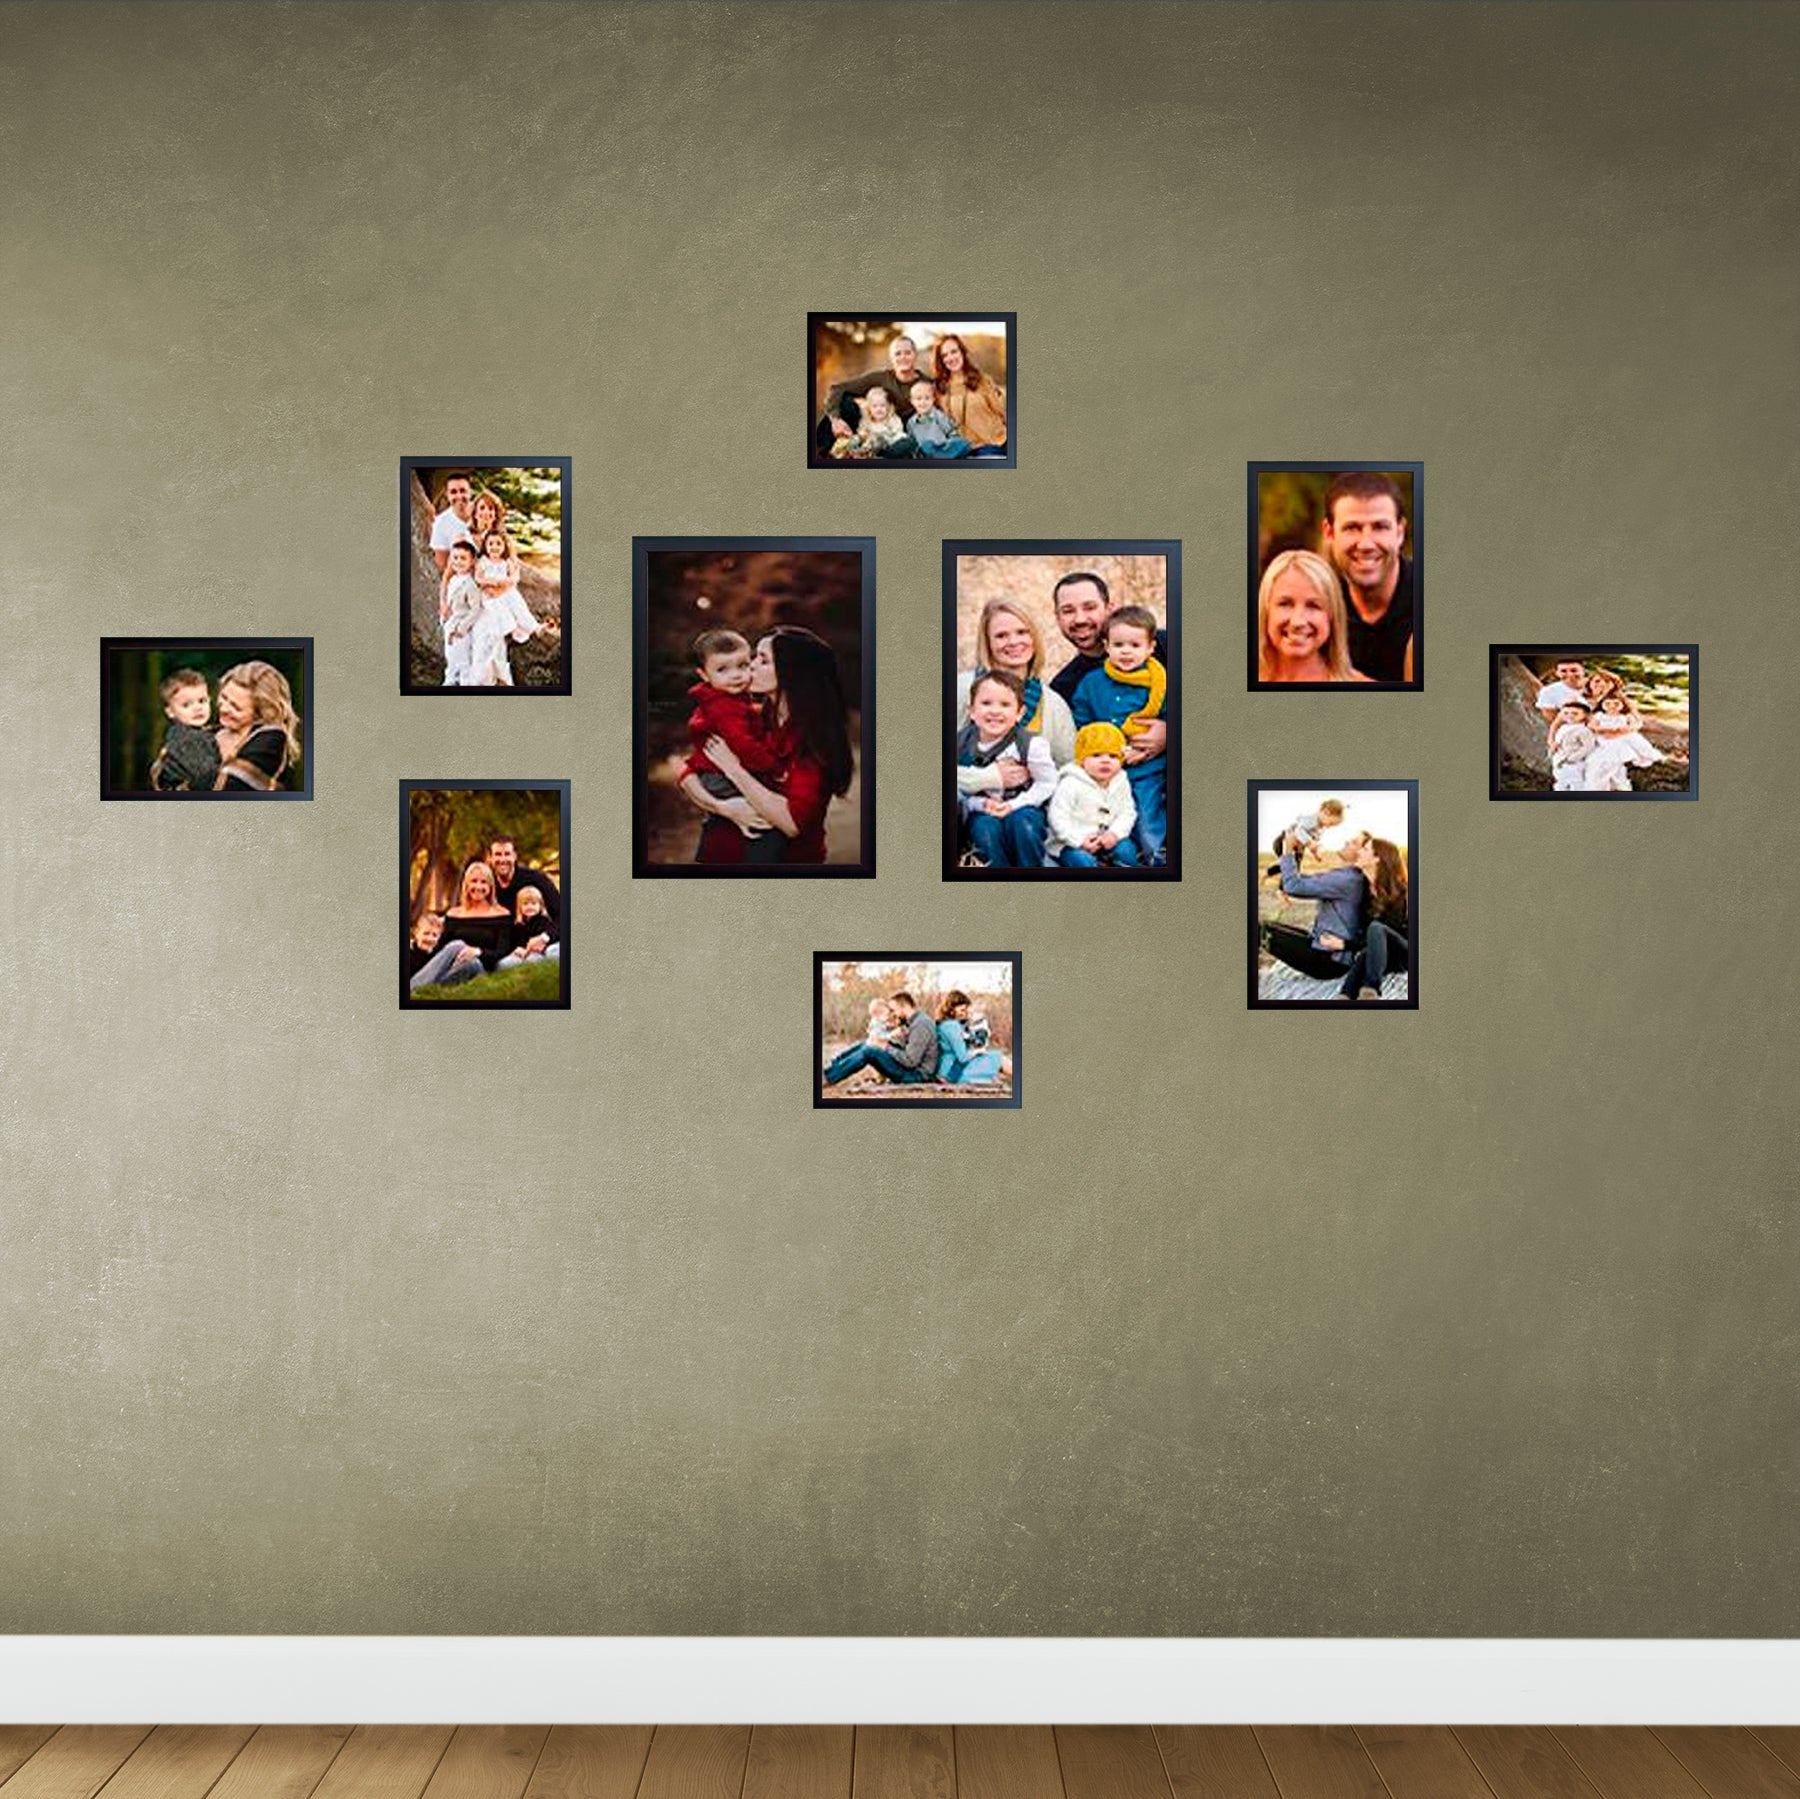 Collage Wall Photo Frame Set of 10 for Home Decor (2 Units of 10 X 14", 4 Units of 8x10", 4 Unit of 6×8 inches)